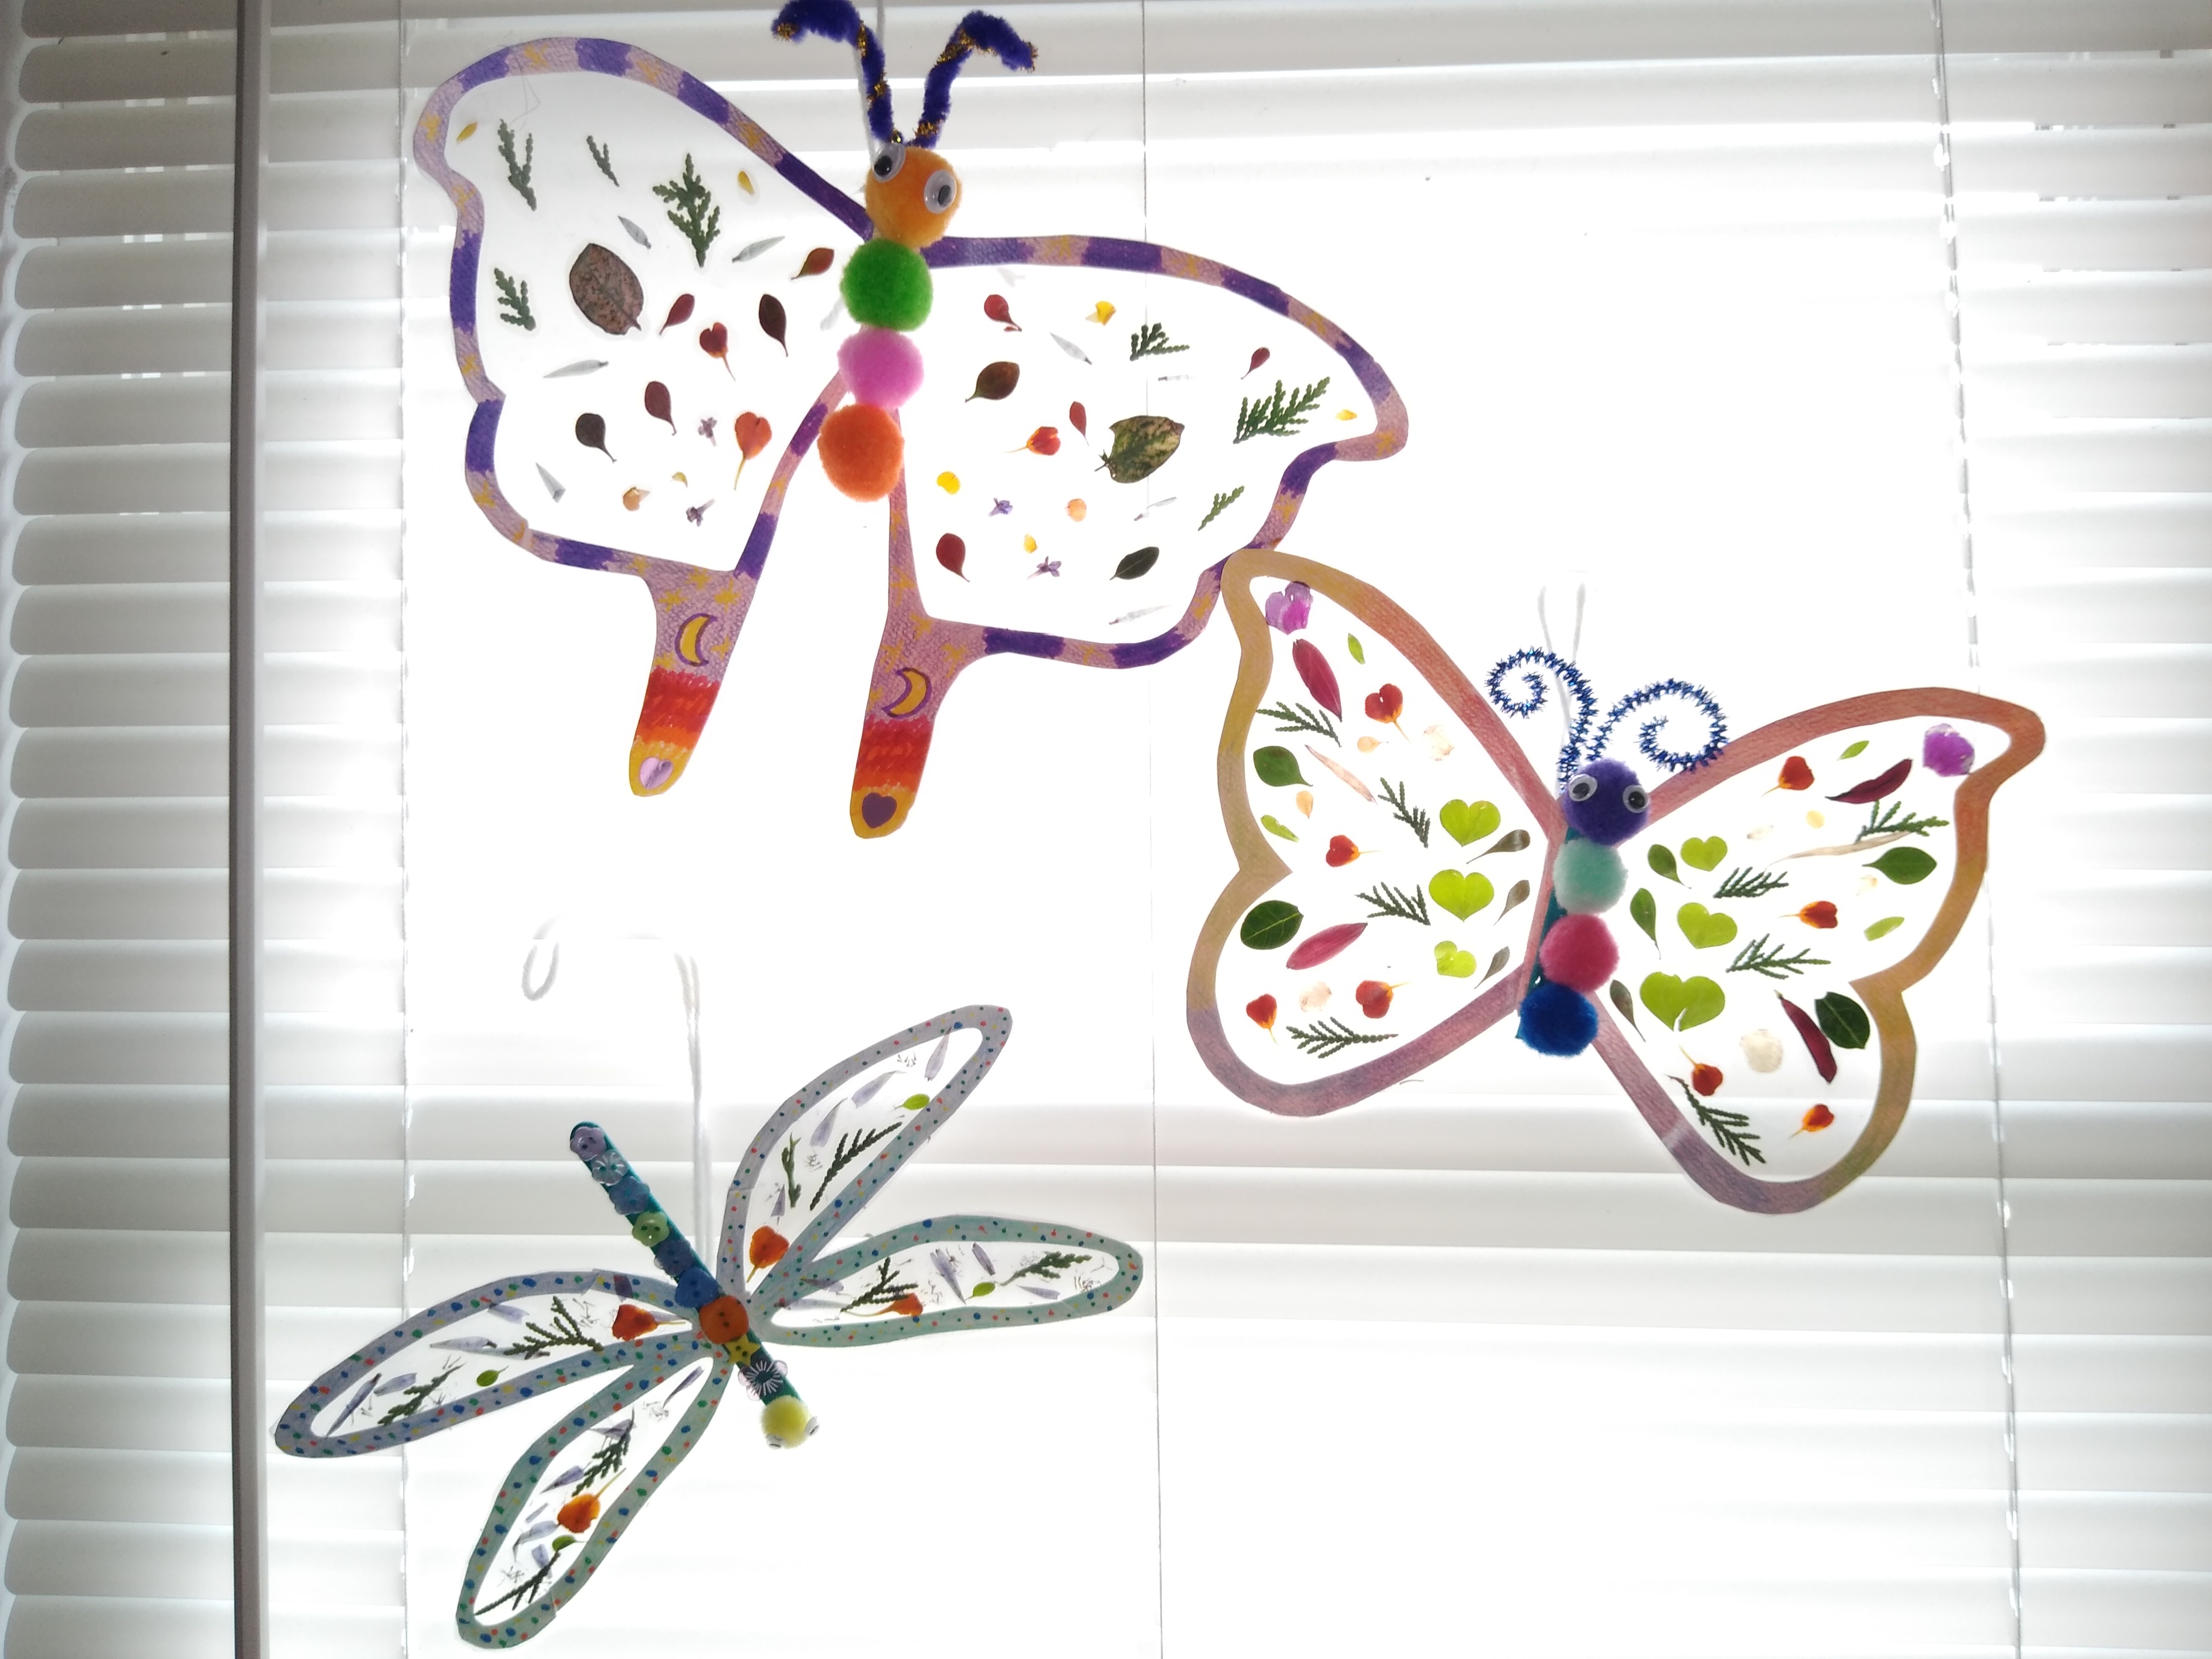 Image for "Insect Suncatcher"